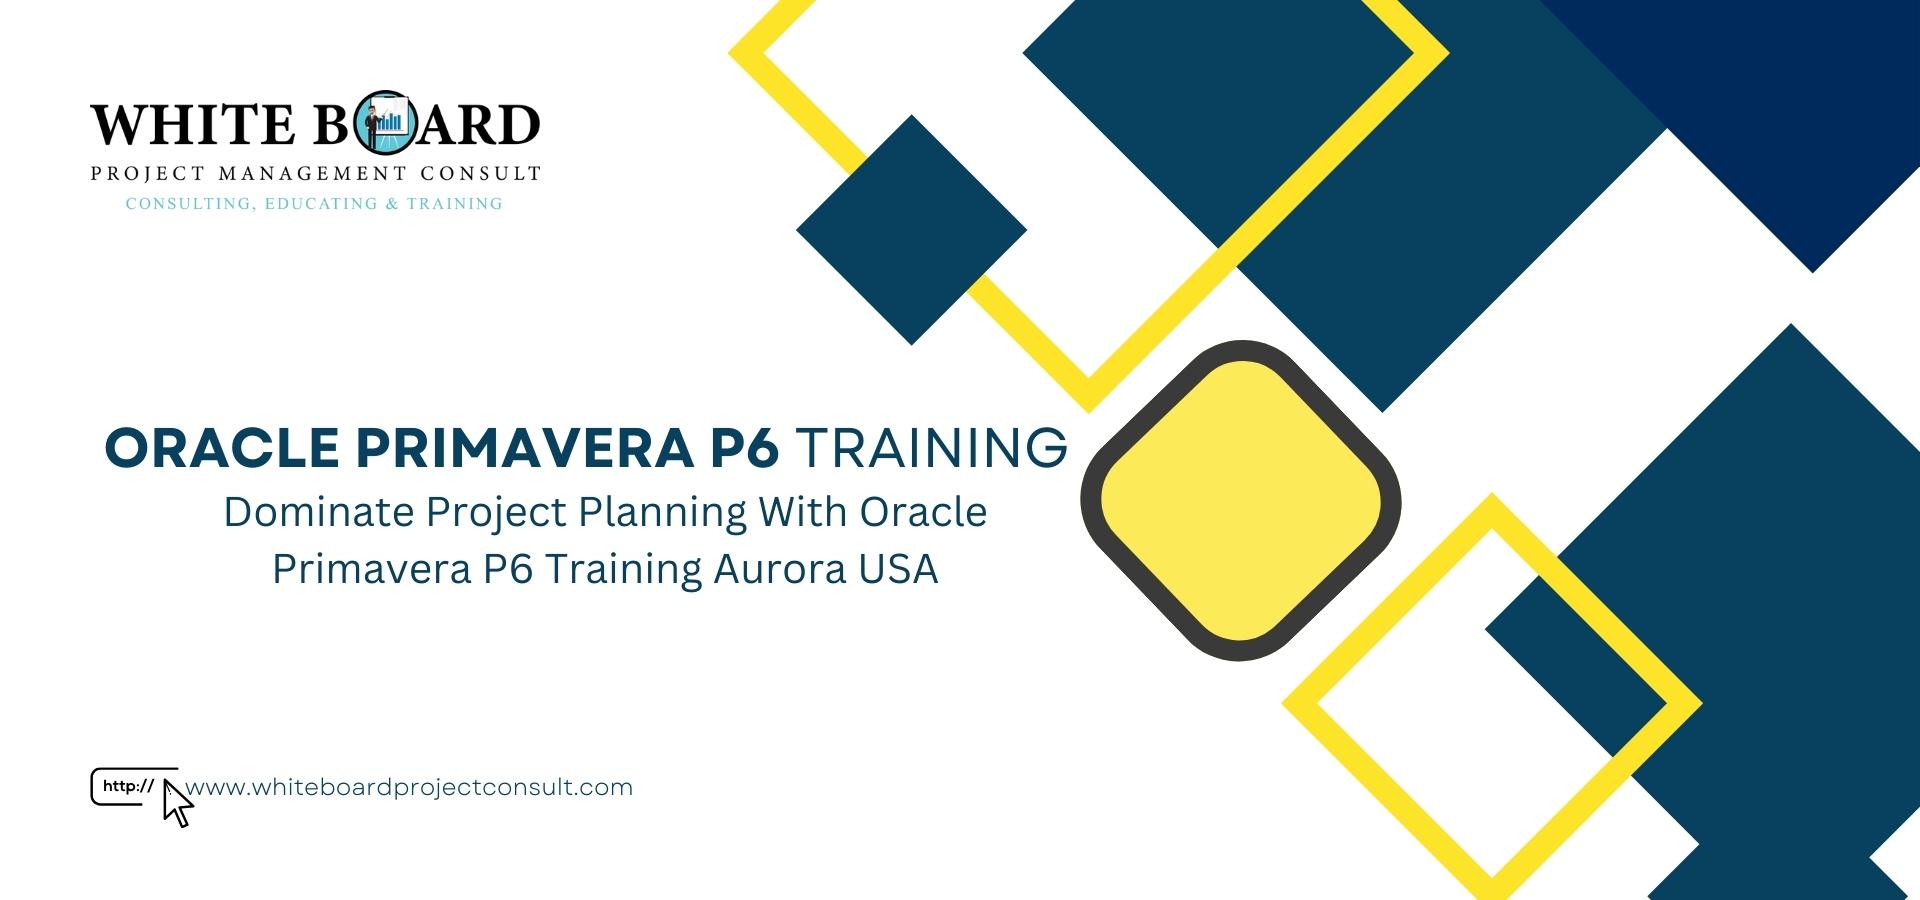 Dominate Project Planning With Oracle Primavera P6 Training Aurora USA